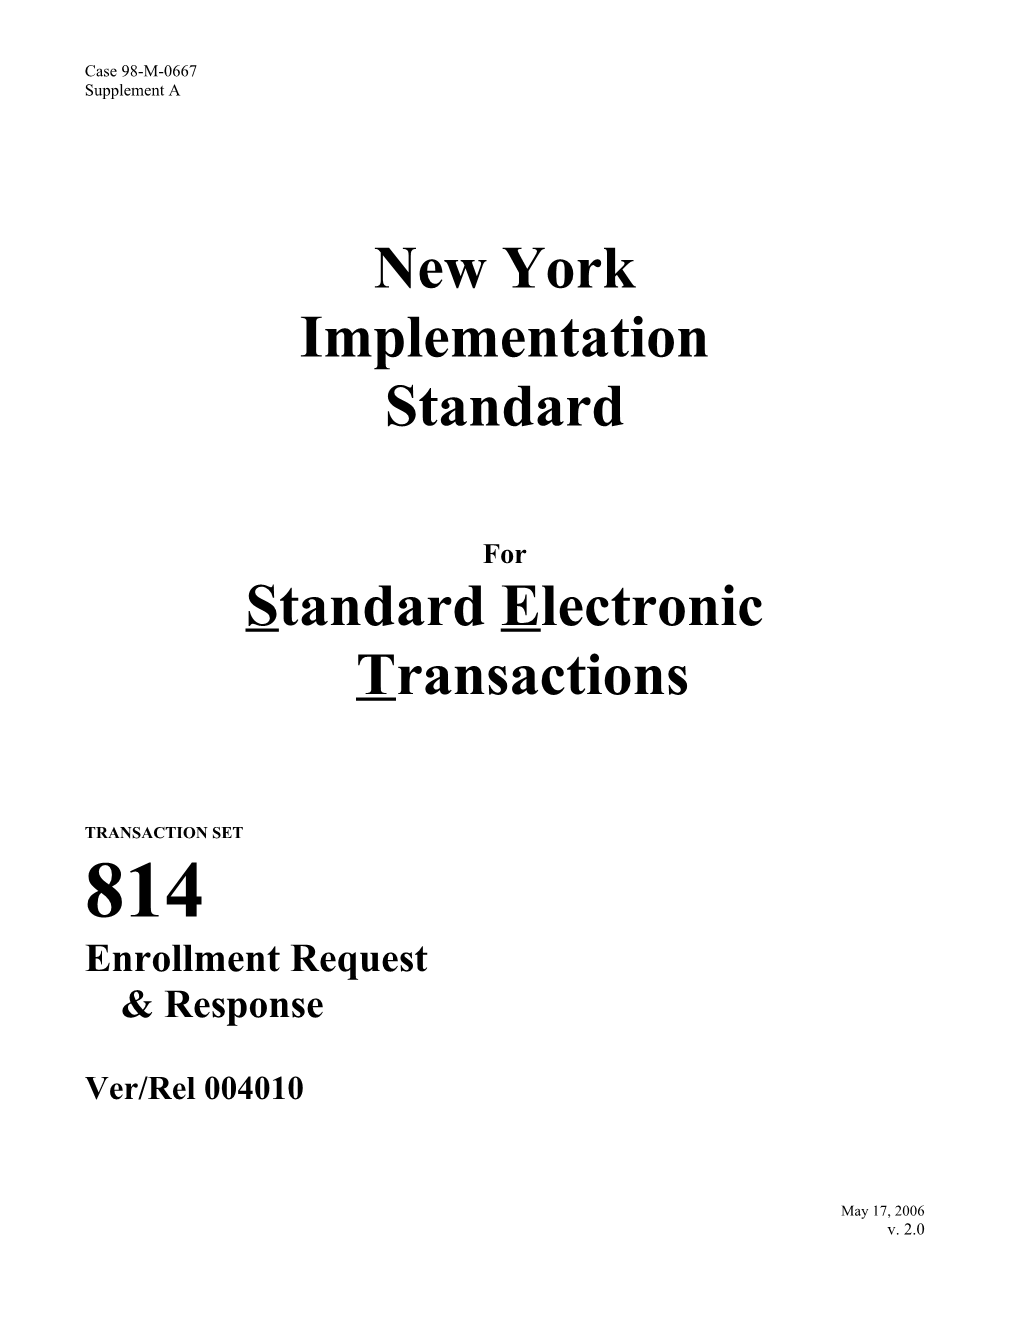 Standard Electronic Transactions